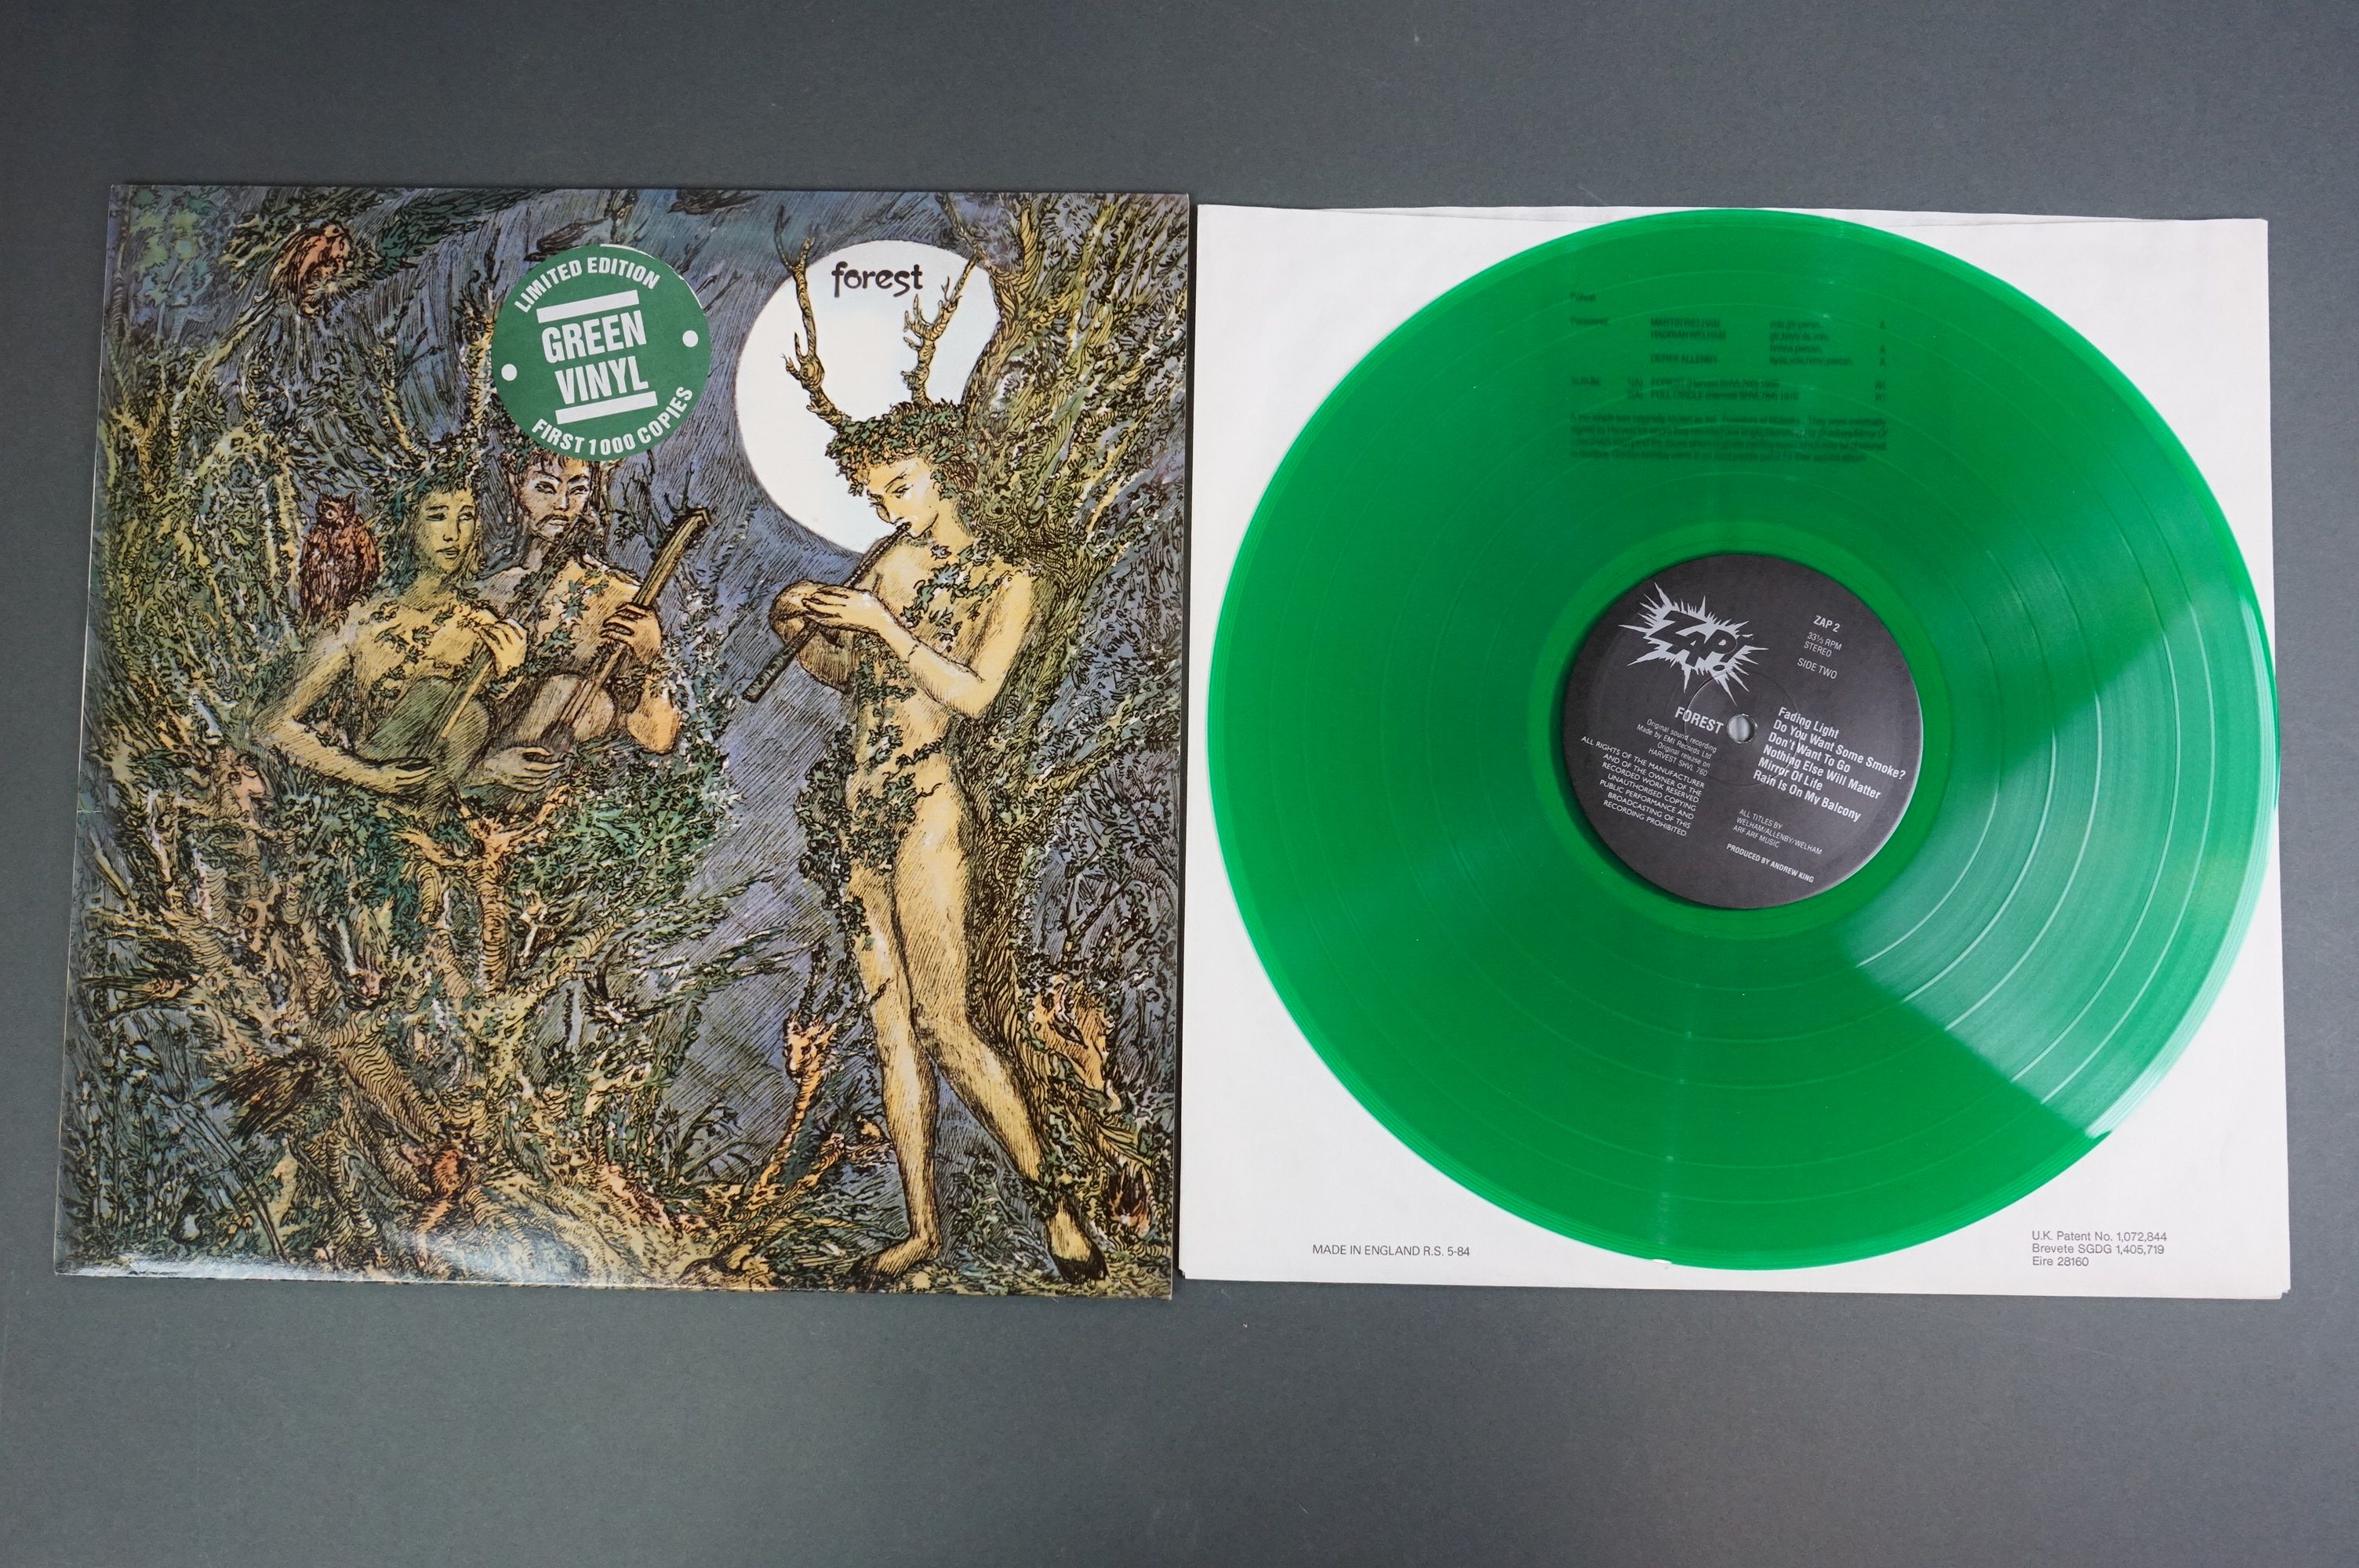 Vinyl - Three Forest LPs to include self titled on Harvest SHVL760 no EMI on label, tape removal - Image 5 of 8